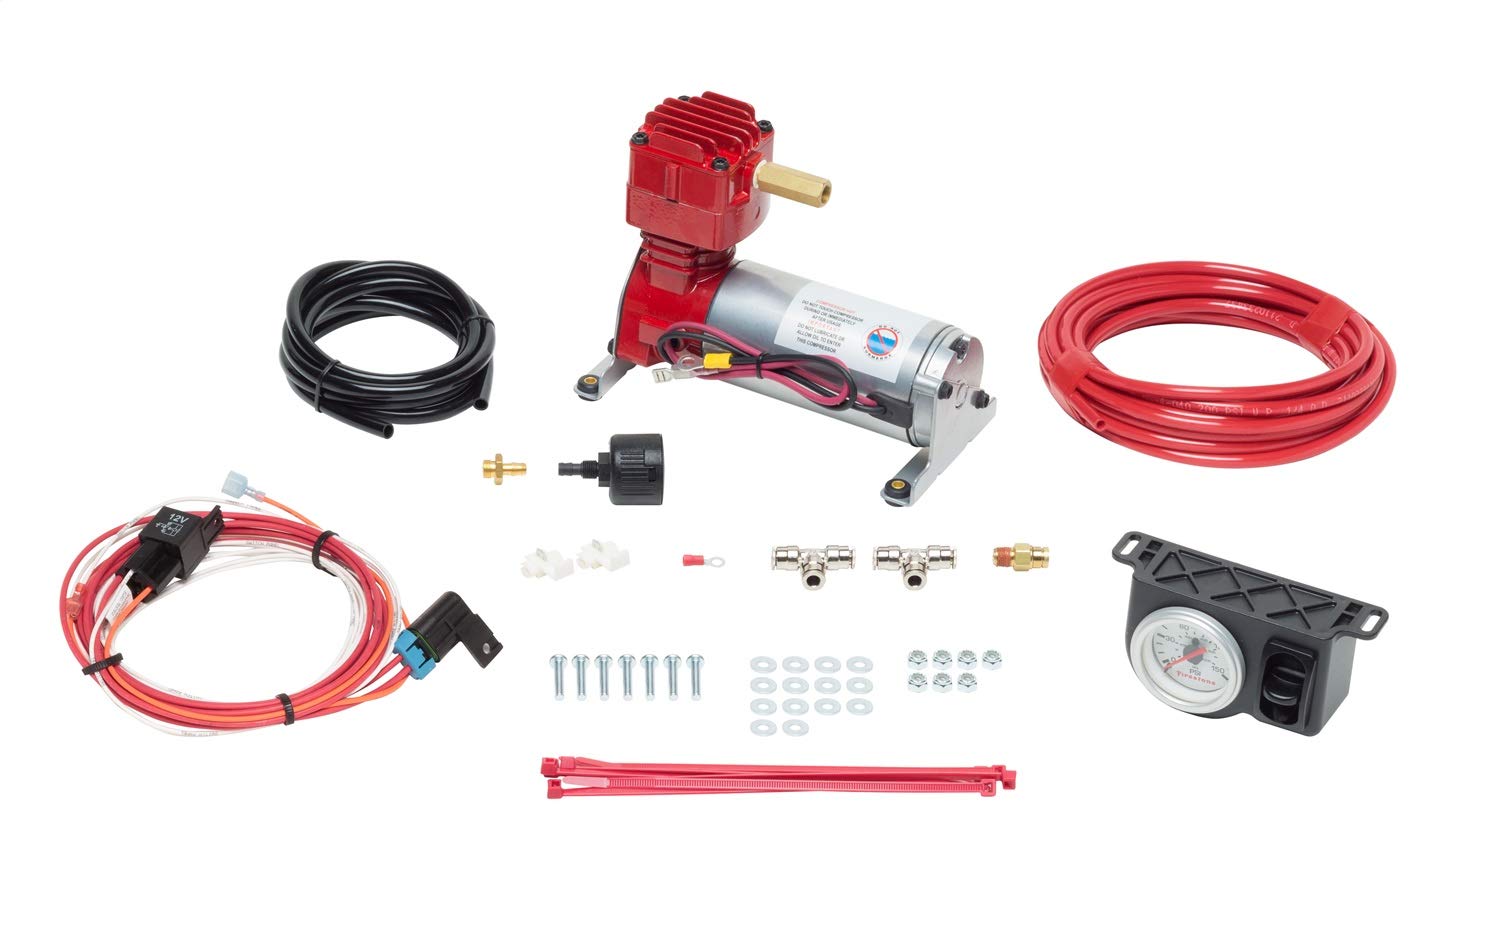 Firestone 2097 Air Command System - Heavy-Duty Single Leveling System